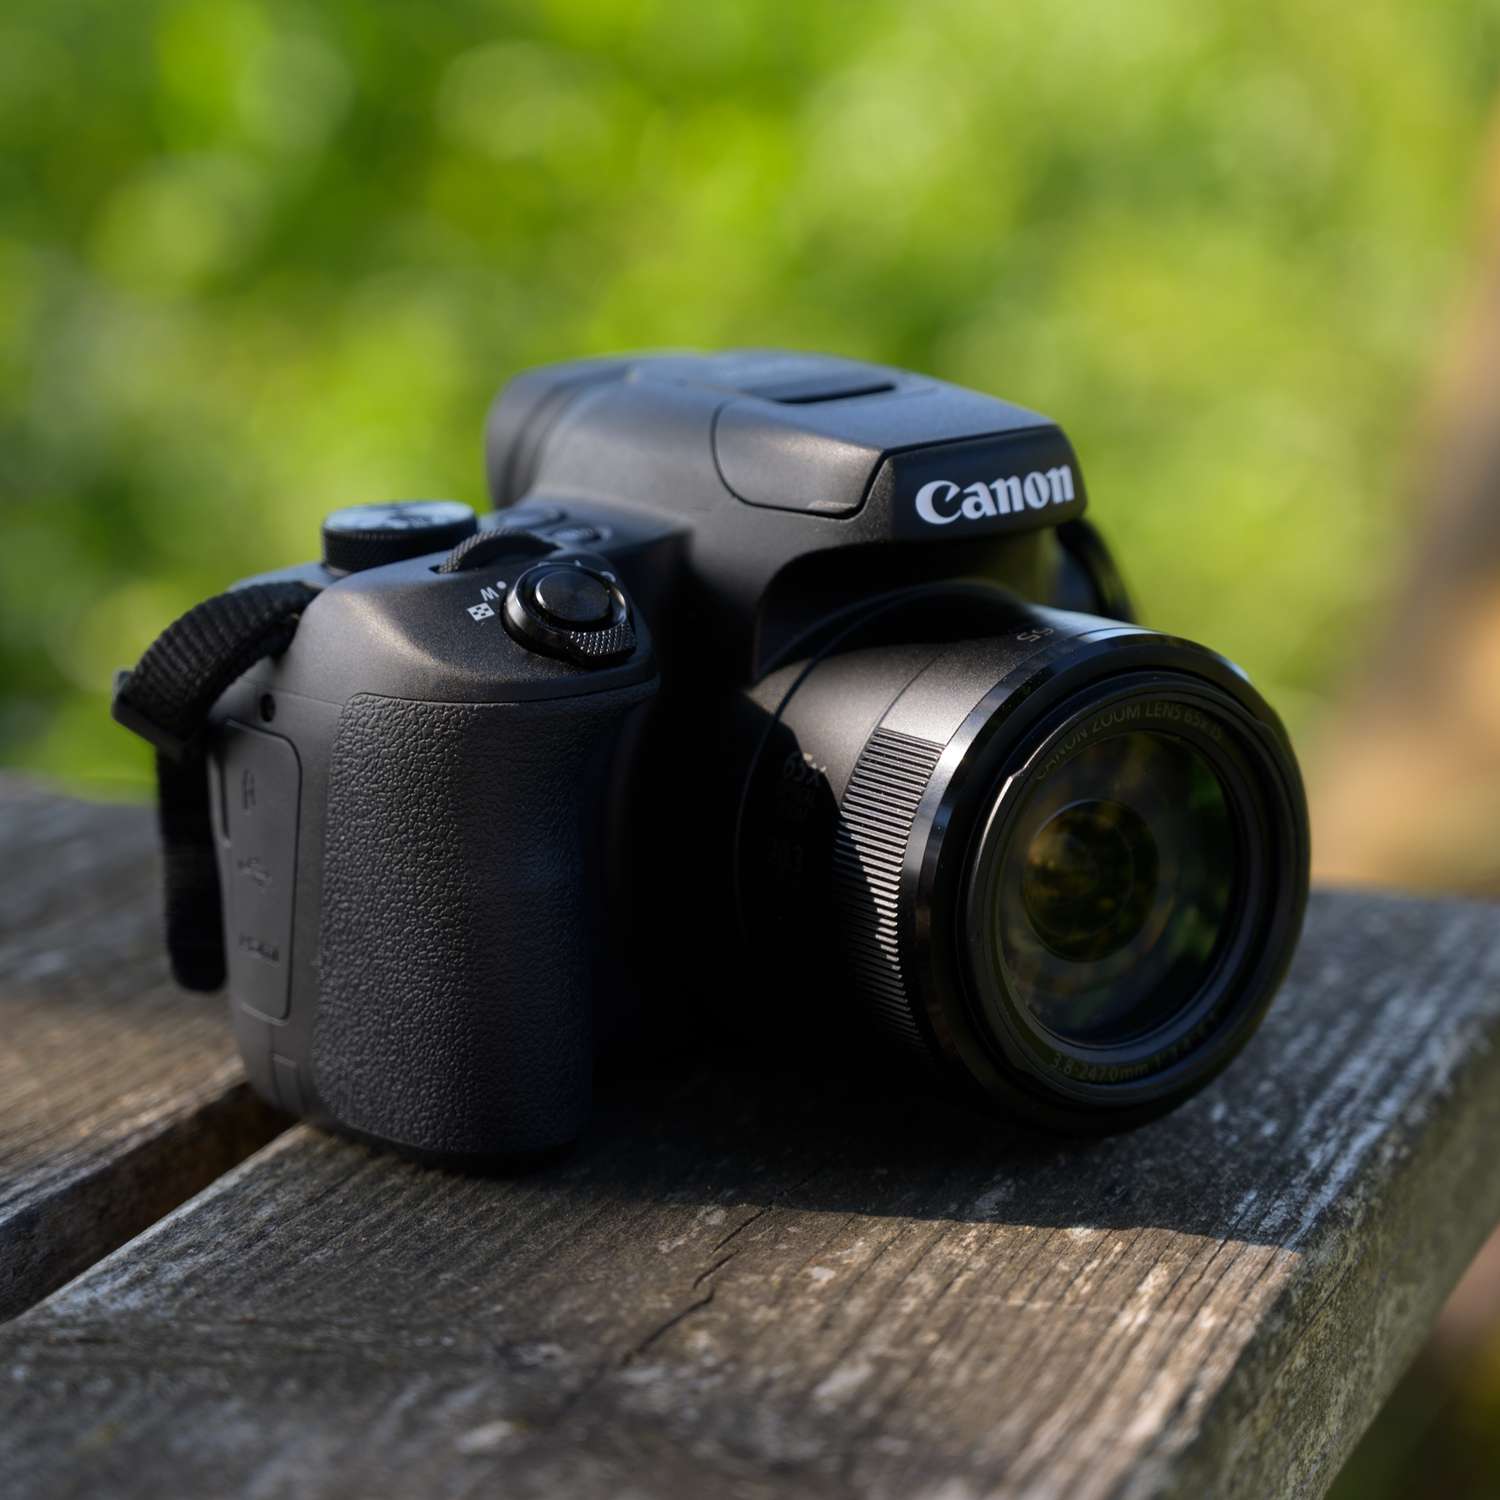 Canon PowerShot SX70 HS: A Compact Camera with an Enormous Zoom